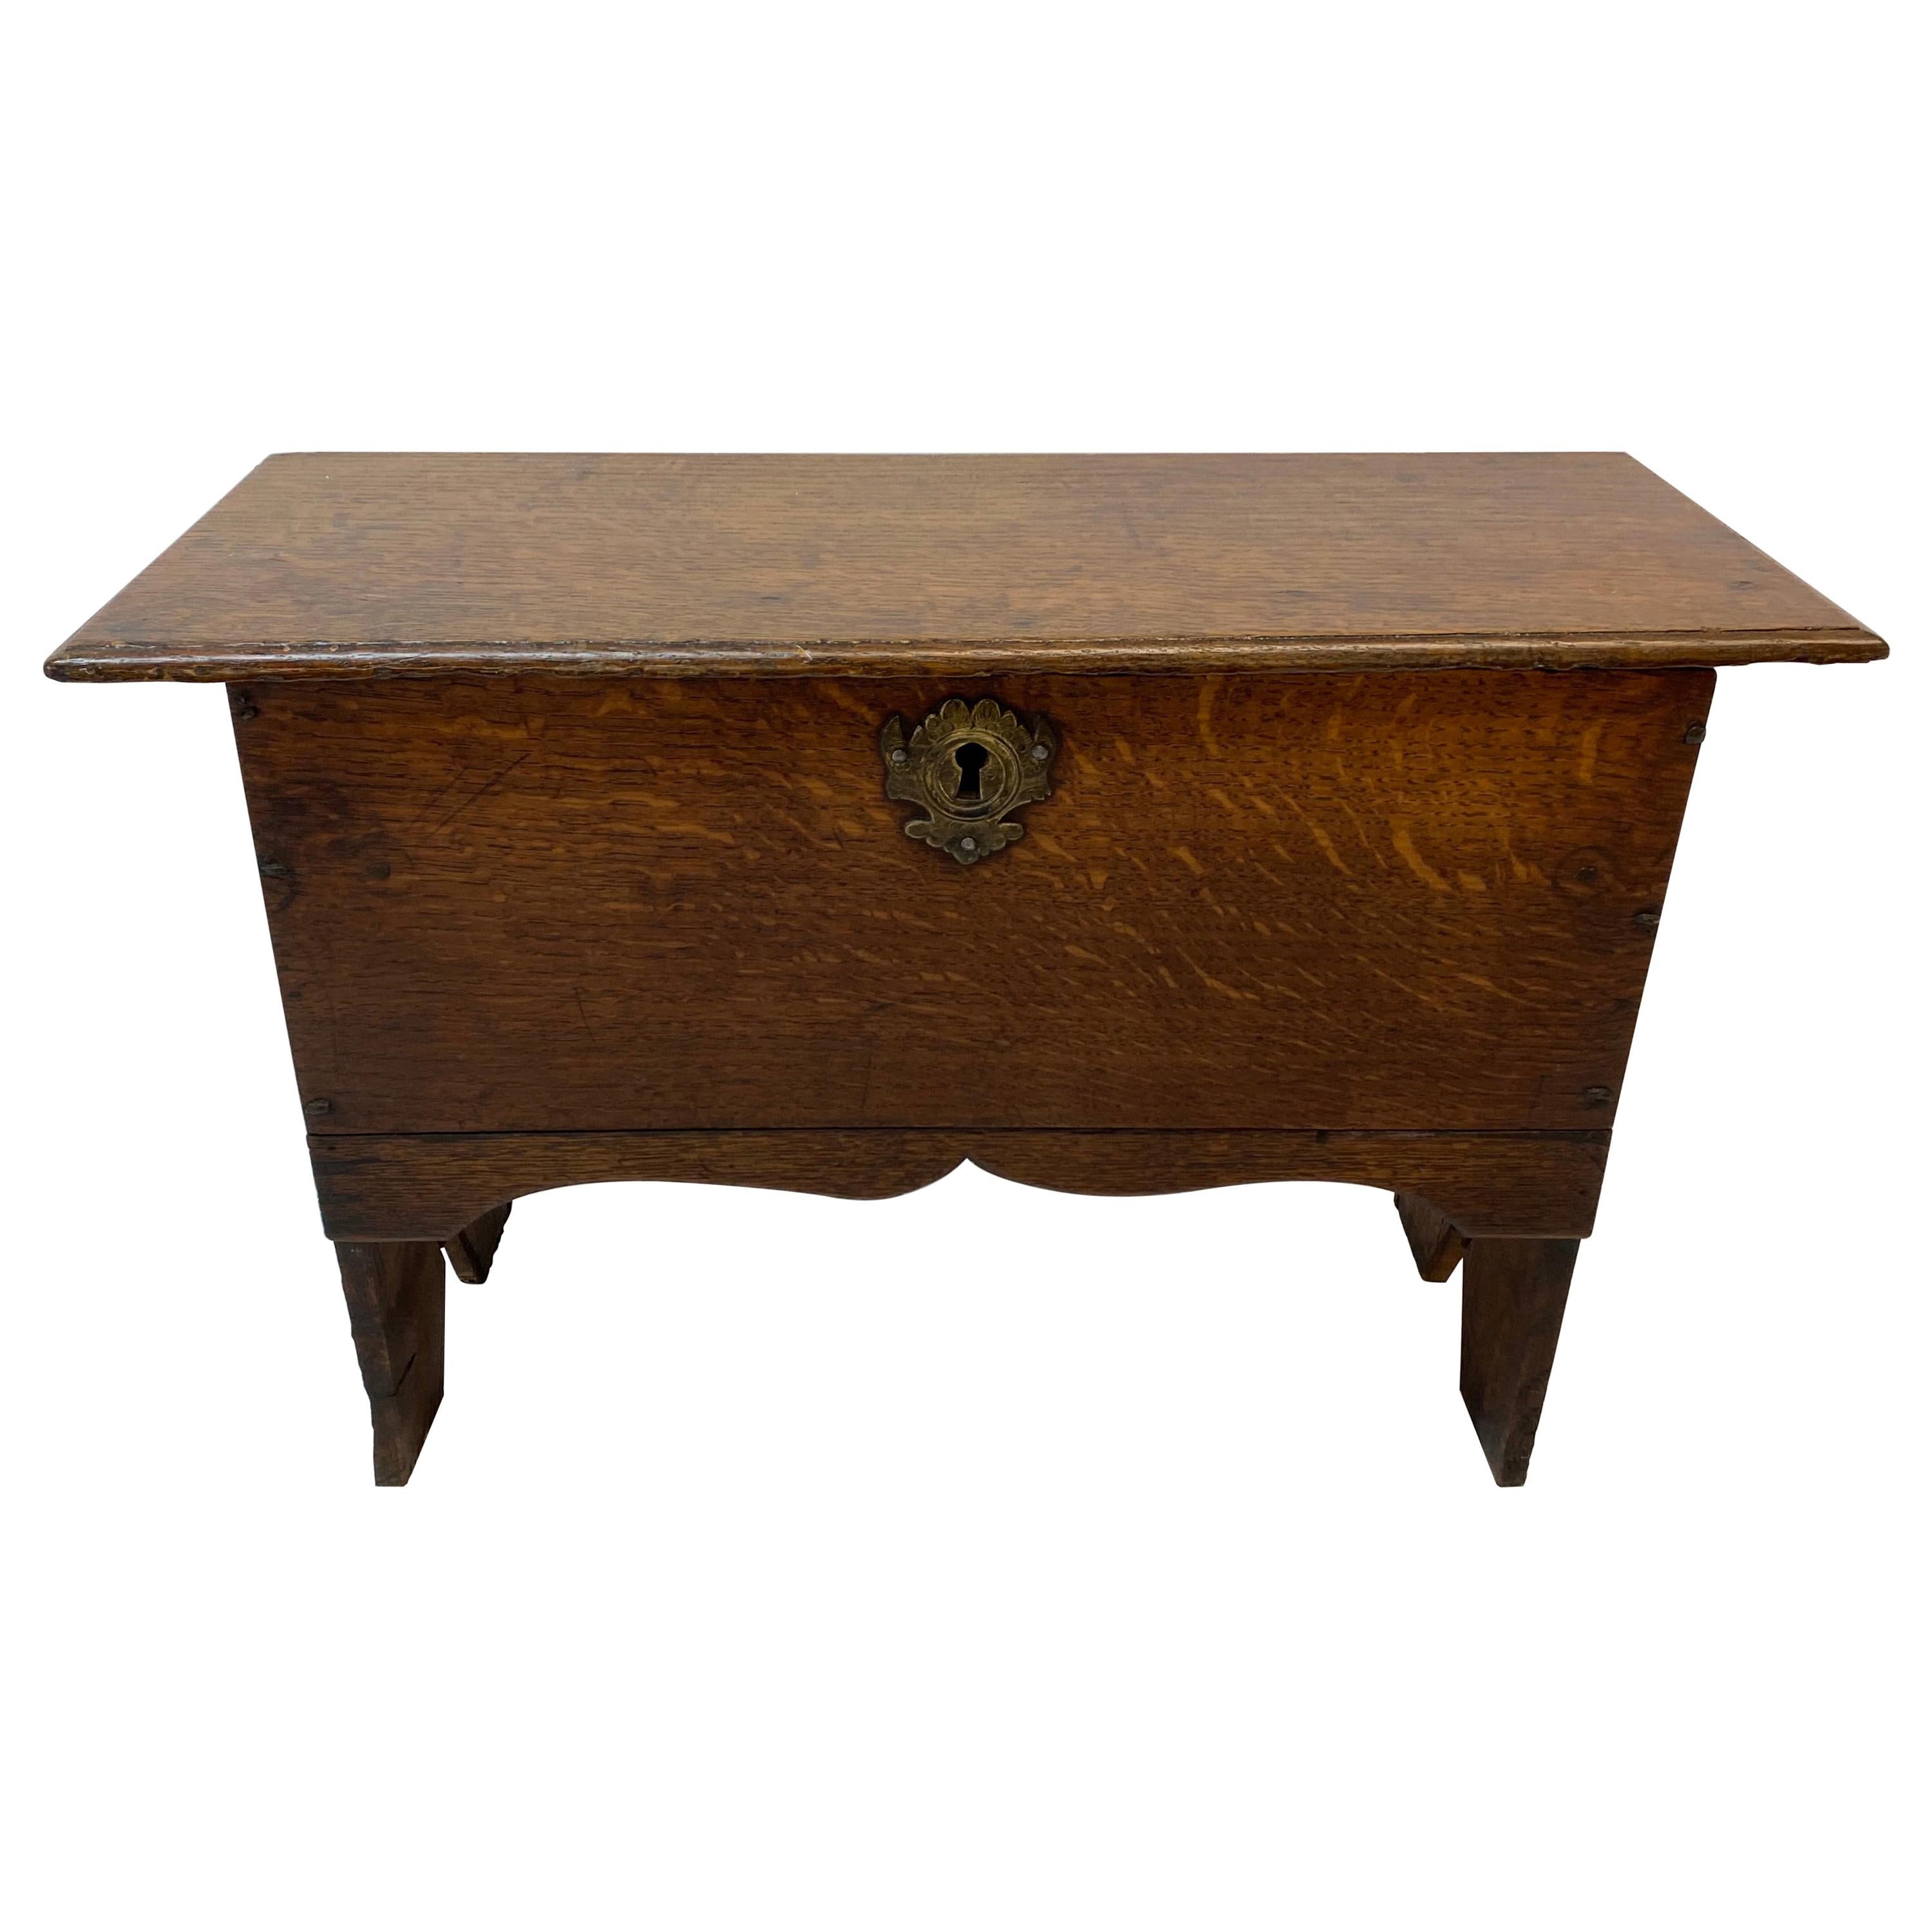 18th to 19th Century Lidded Oak Low Stool with Interior Storage